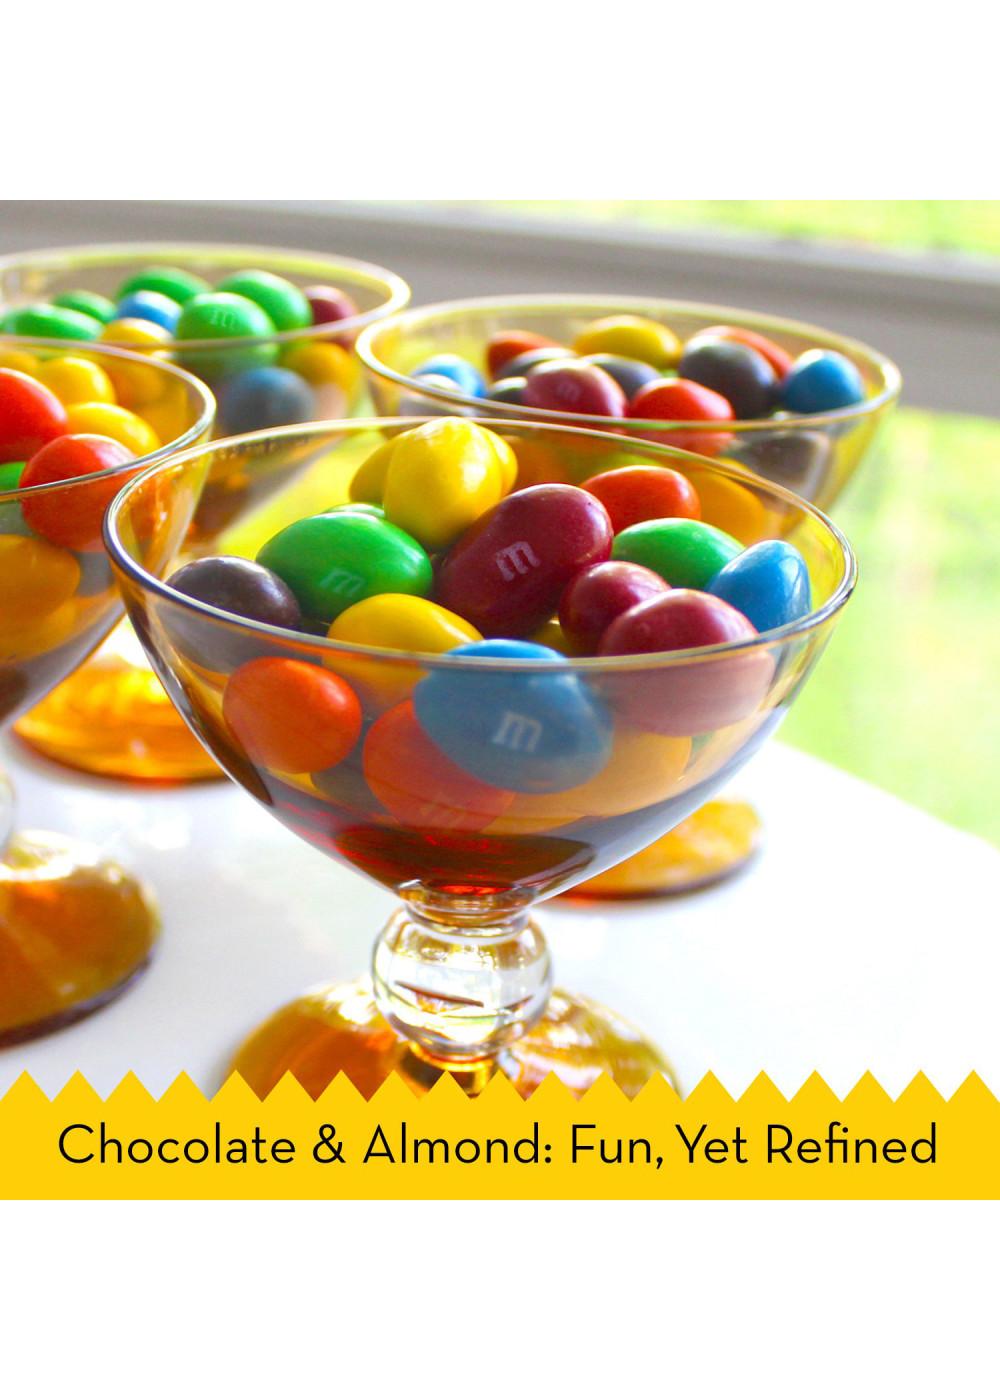 M&M'S Almond Milk Chocolate Candy - Share Size - Shop Candy at H-E-B